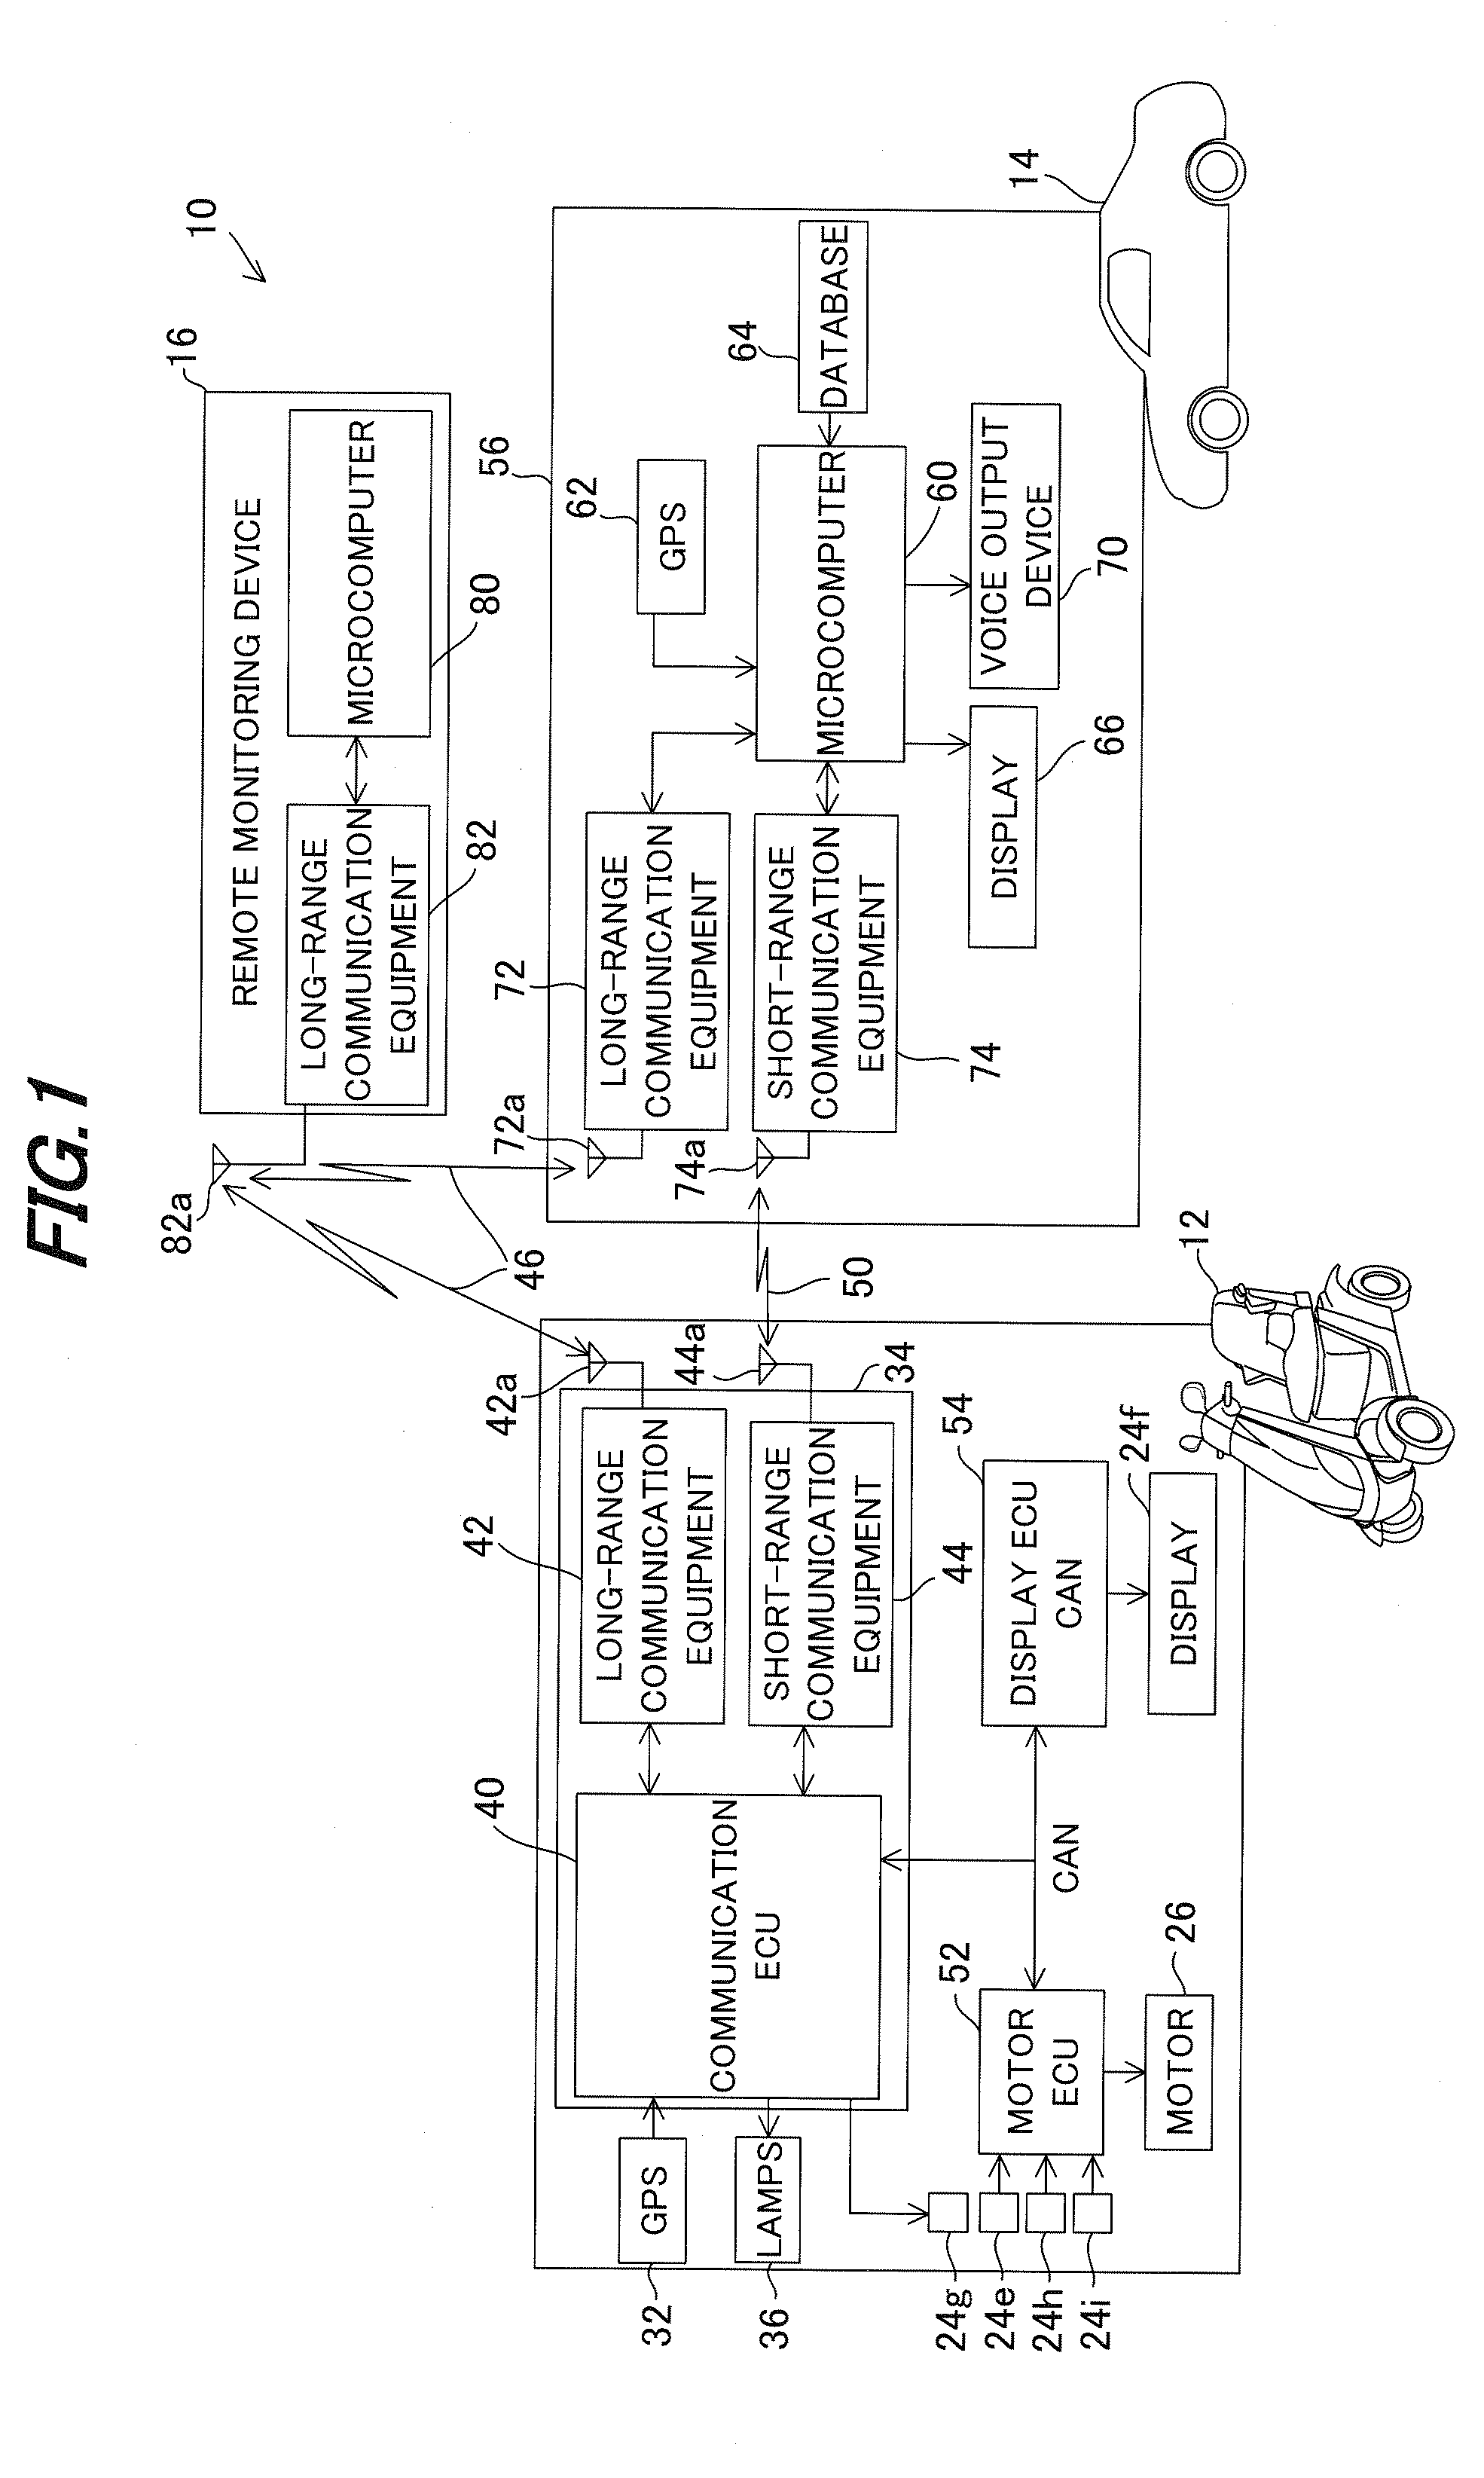 Monitoring system for low-speed mobility vehicle and another type of vehicle